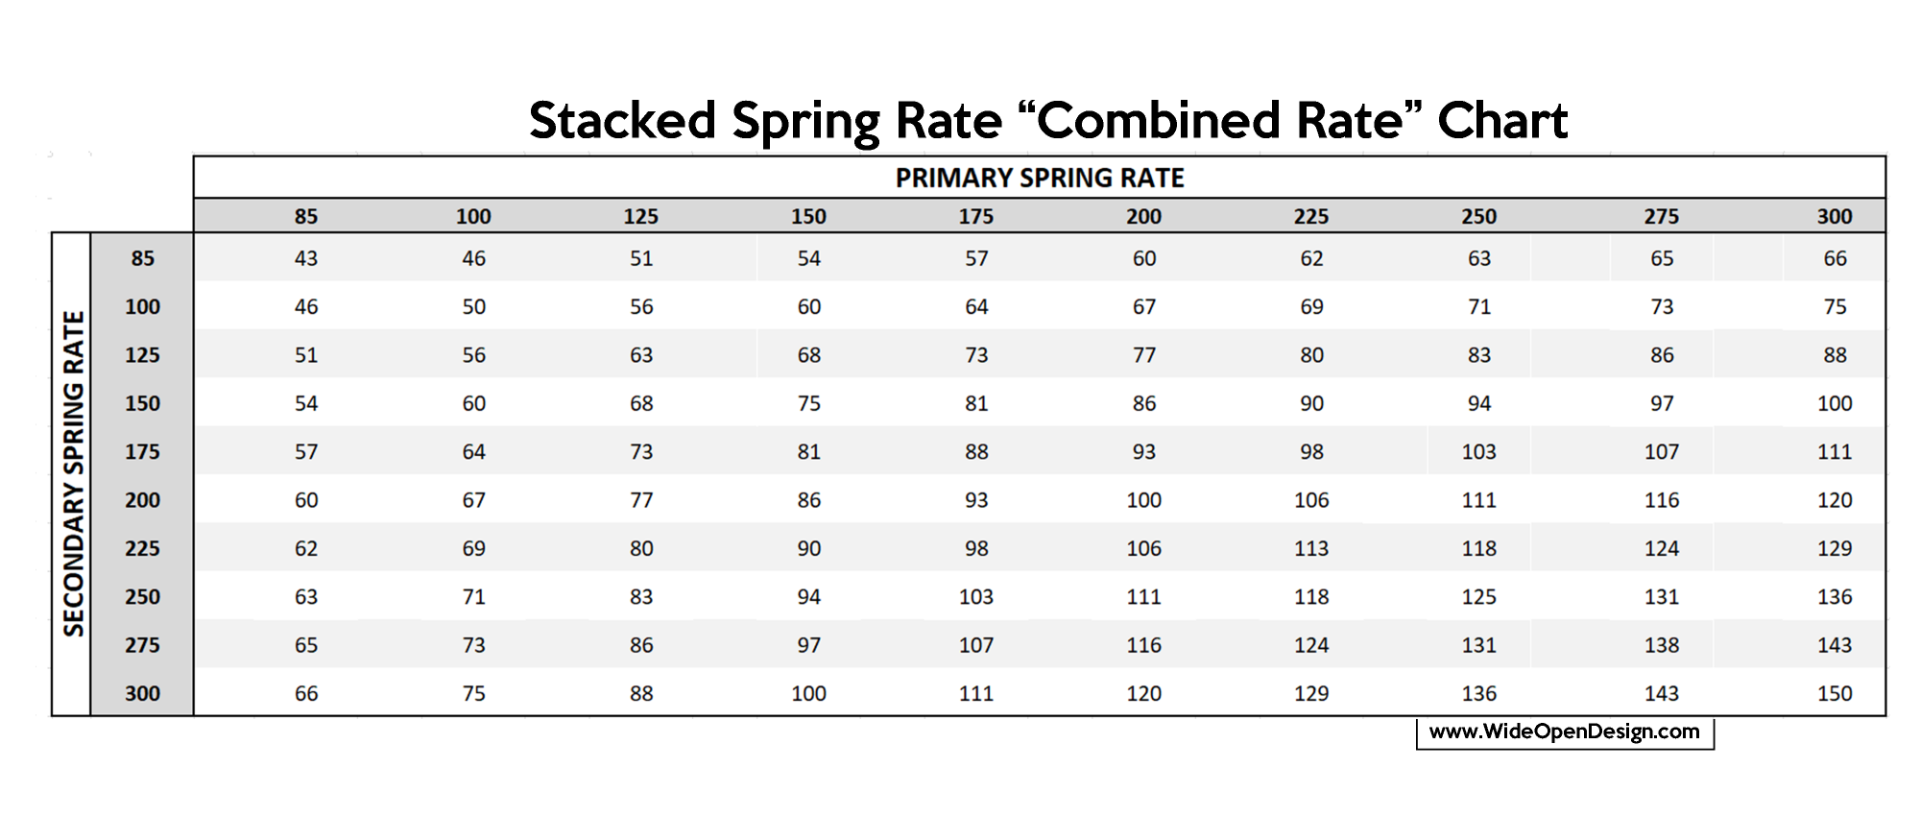 Stacked Spring Rate 